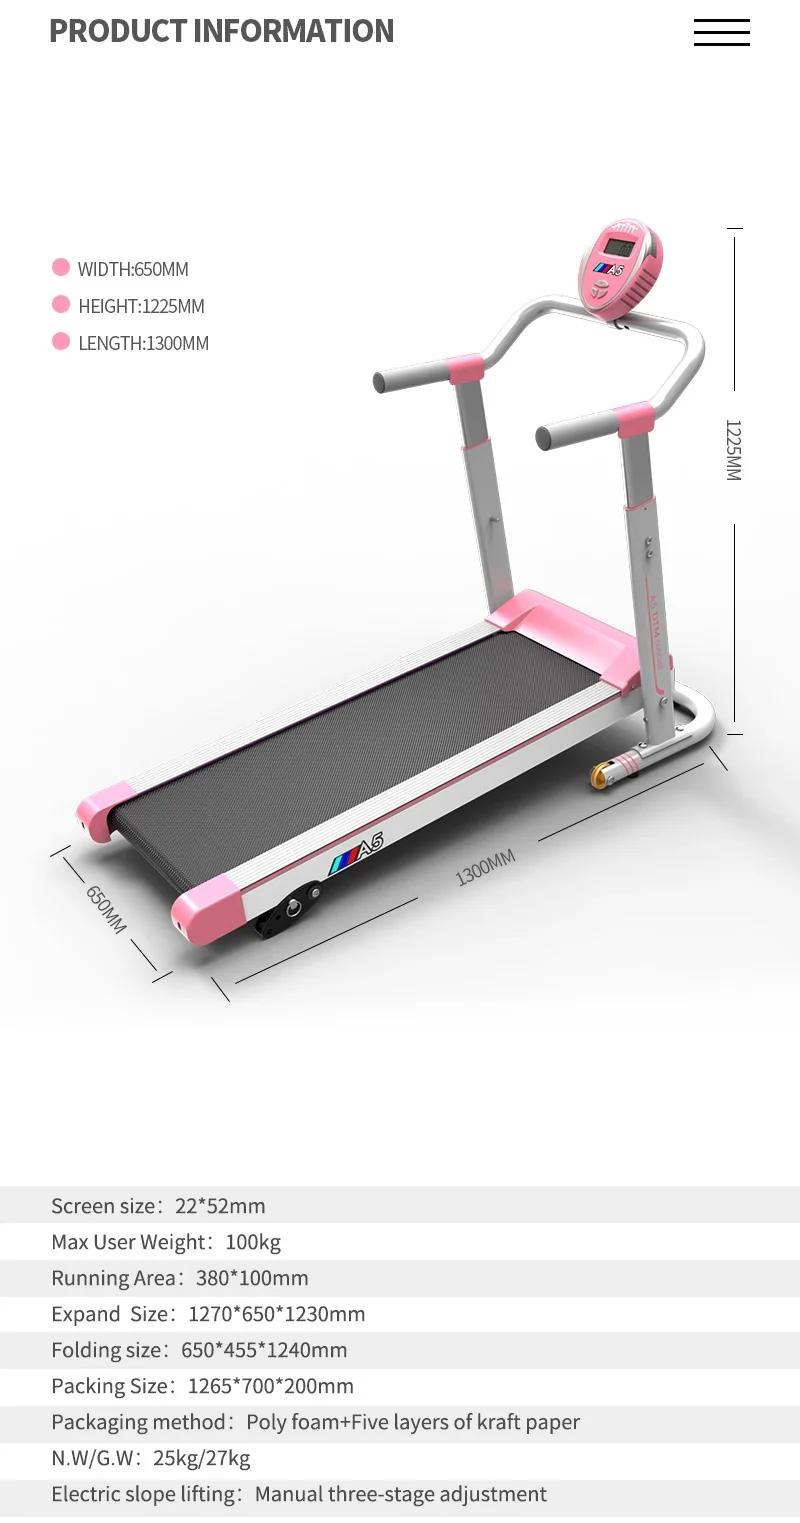 cheapest place to buy a treadmill